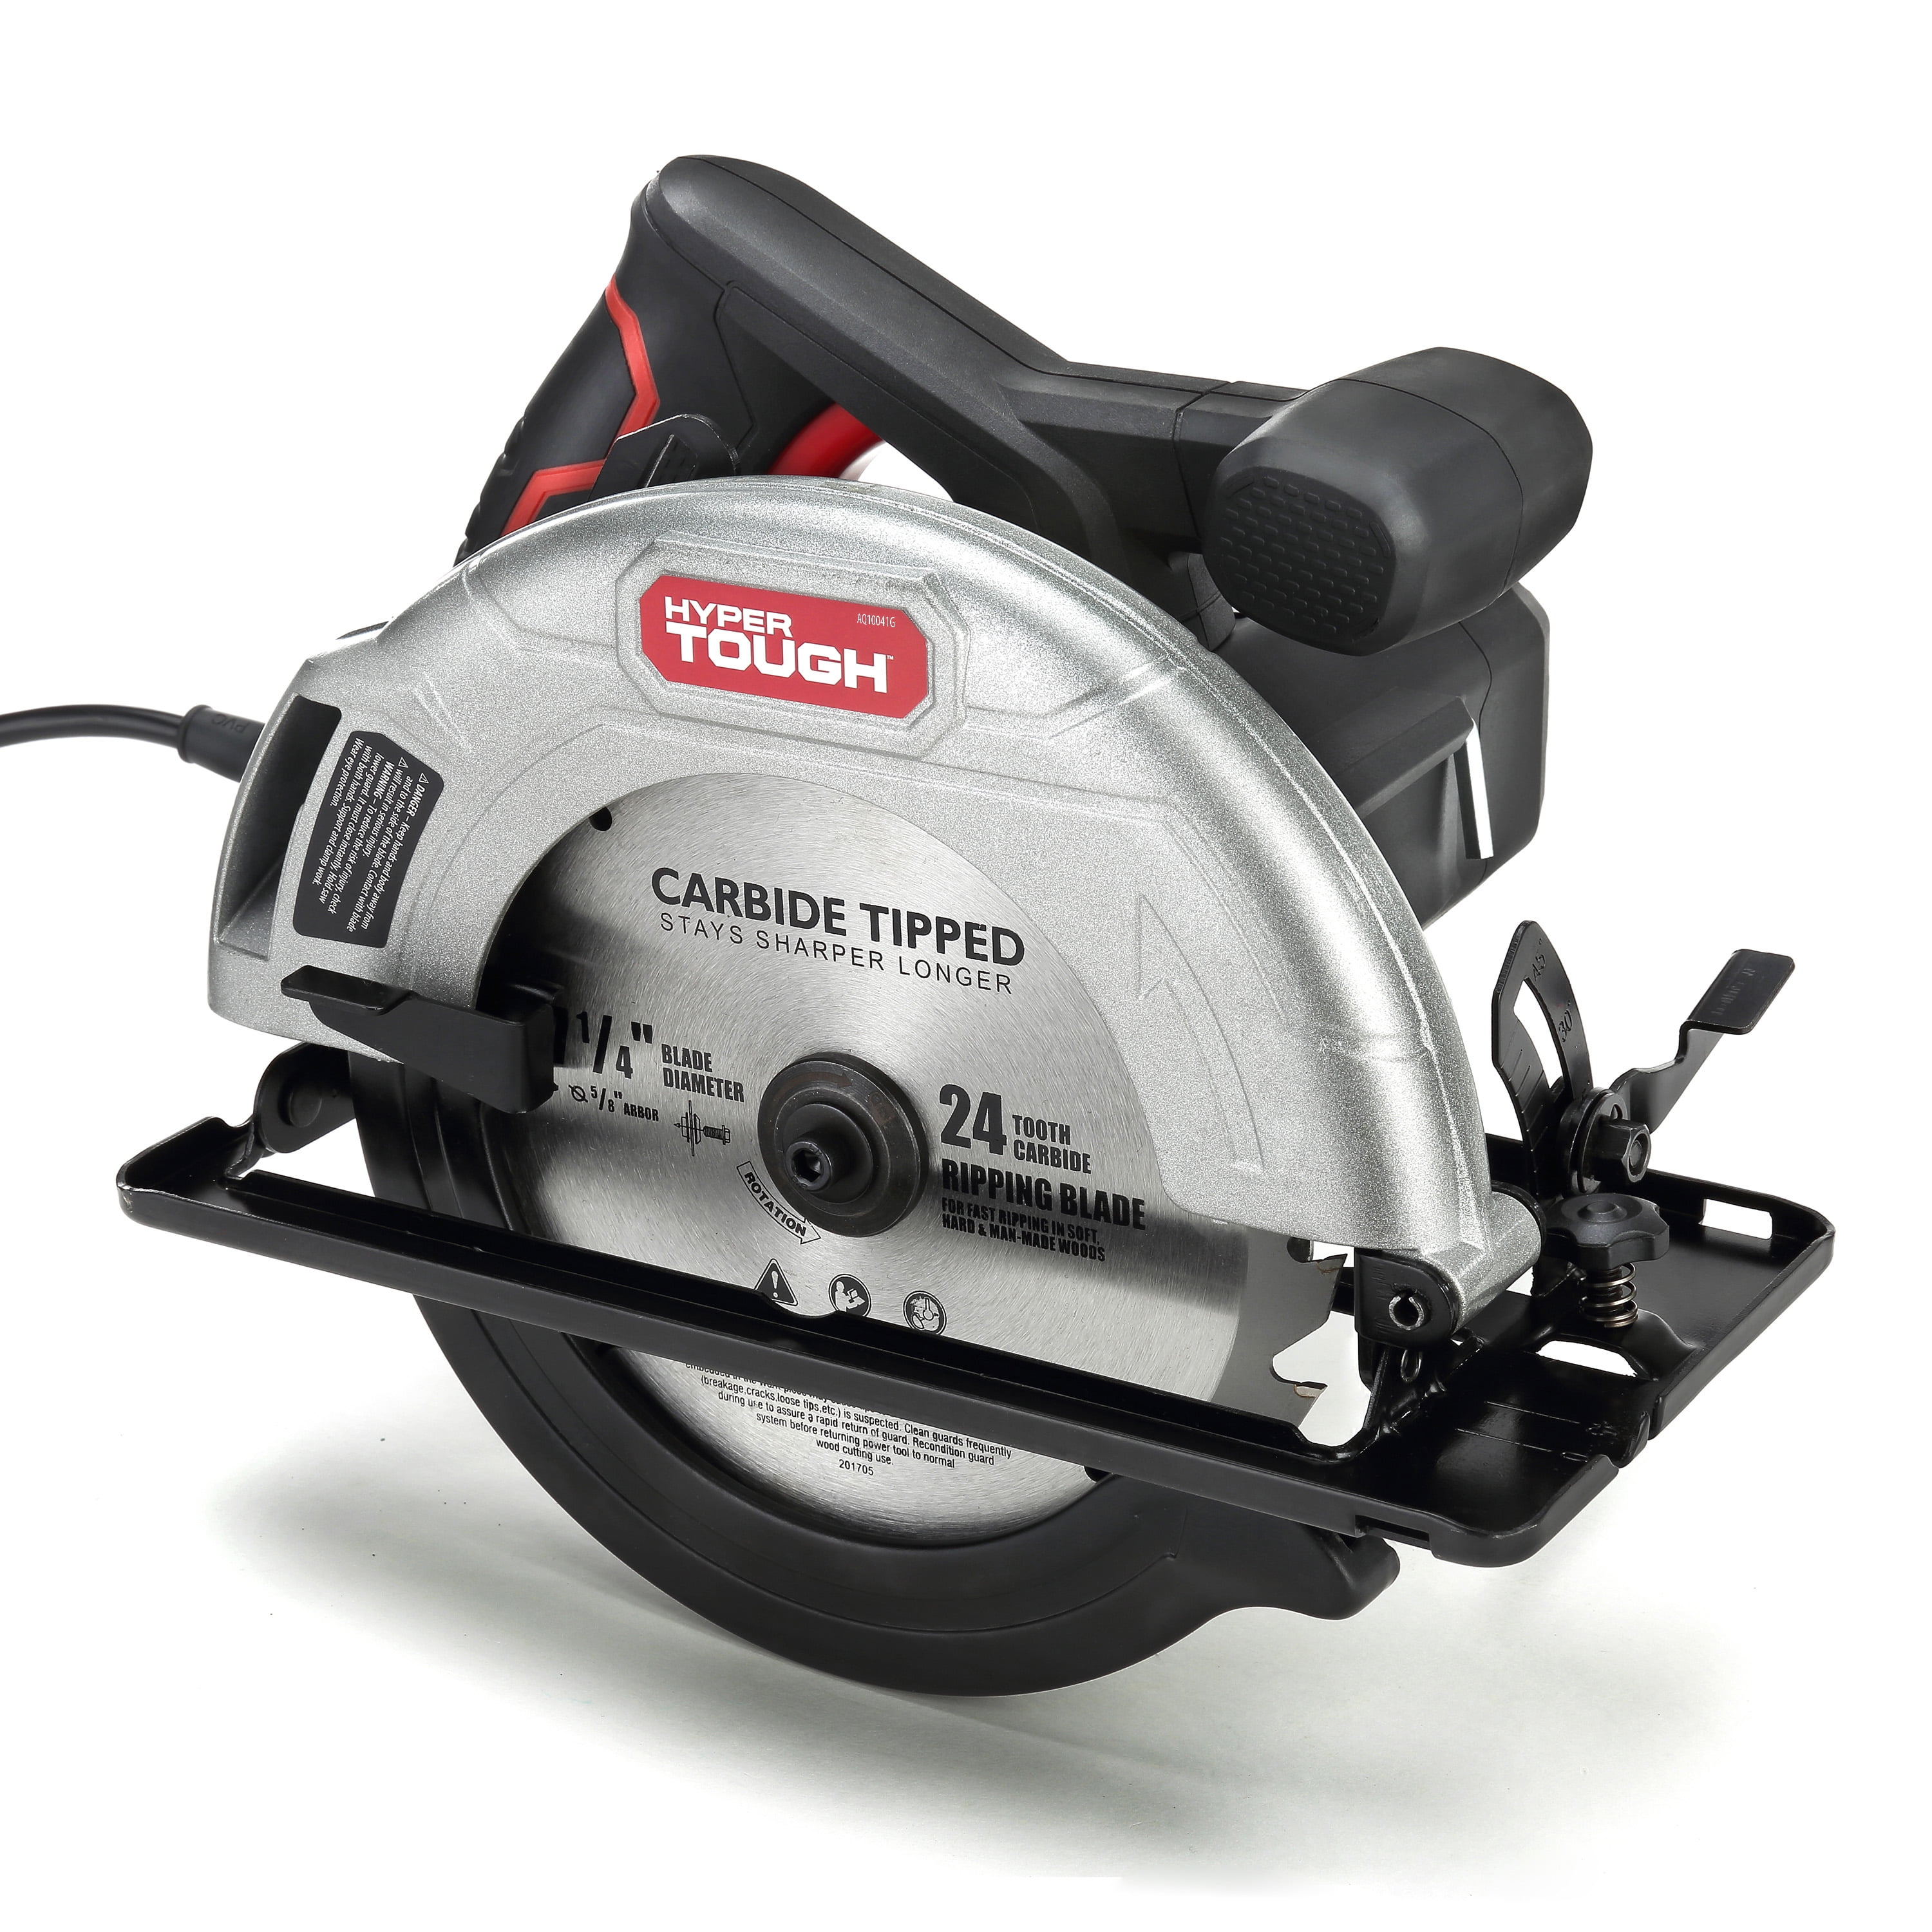 Hyper Tough 12 Amp Corded 7-1/4 inch Circular Saw with Steel Plate Shoe,  Adjustable Bevel, Blade  Rip Fence